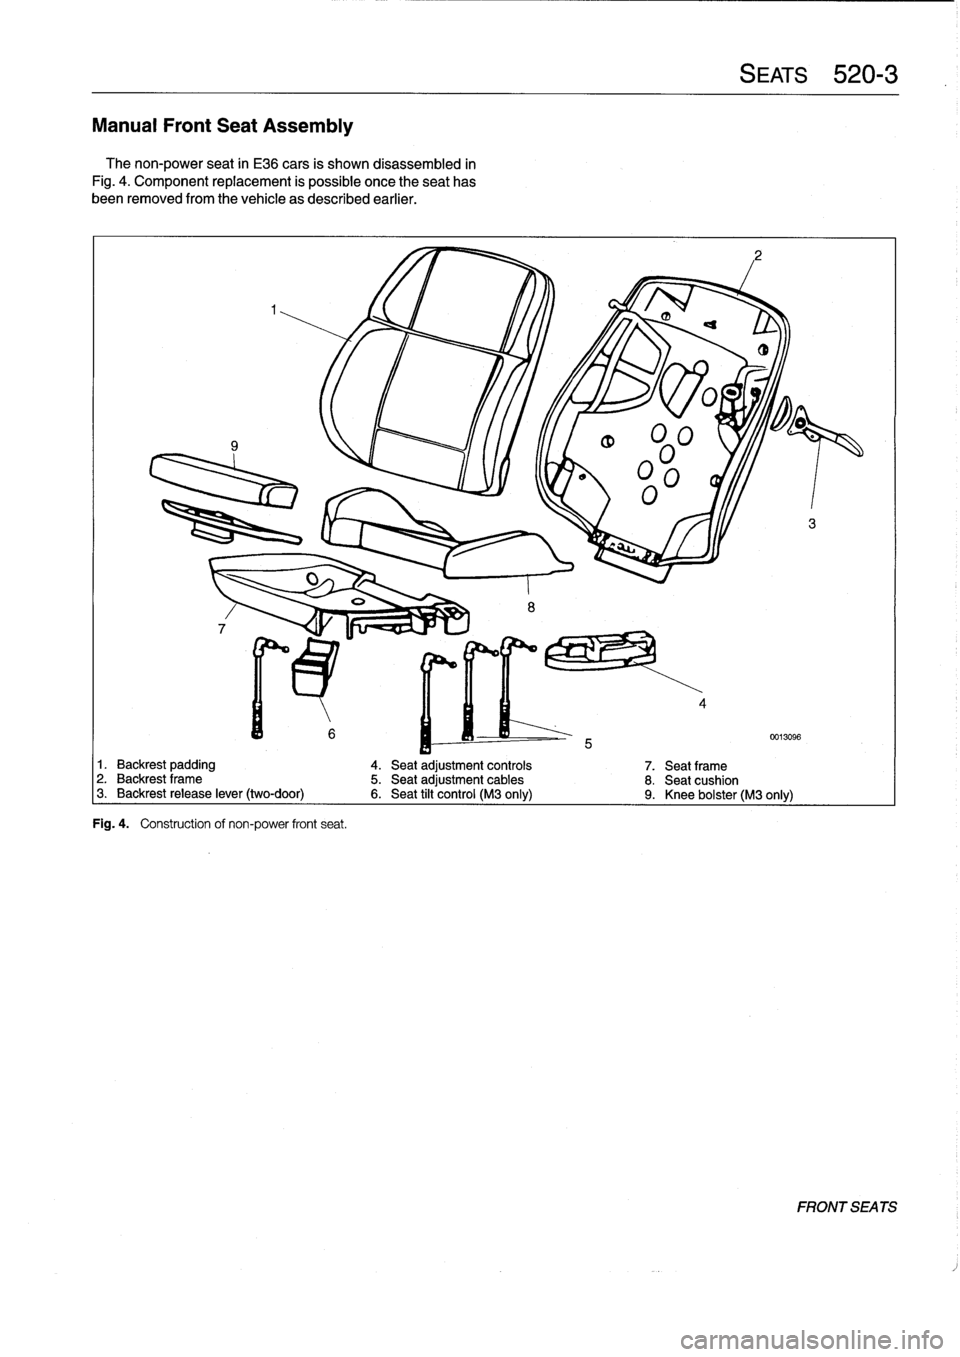 BMW M3 1996 E36 Workshop Manual 
Manual
Front
Seat
Assembly

The
non-power
seat
in
E36
cars
is
shown
disassembled
in

Fig
.
4
.
Component
replacement
is
possible
once
theseat
has

been
removed
from
the
vehicle
as
described
earlier
.